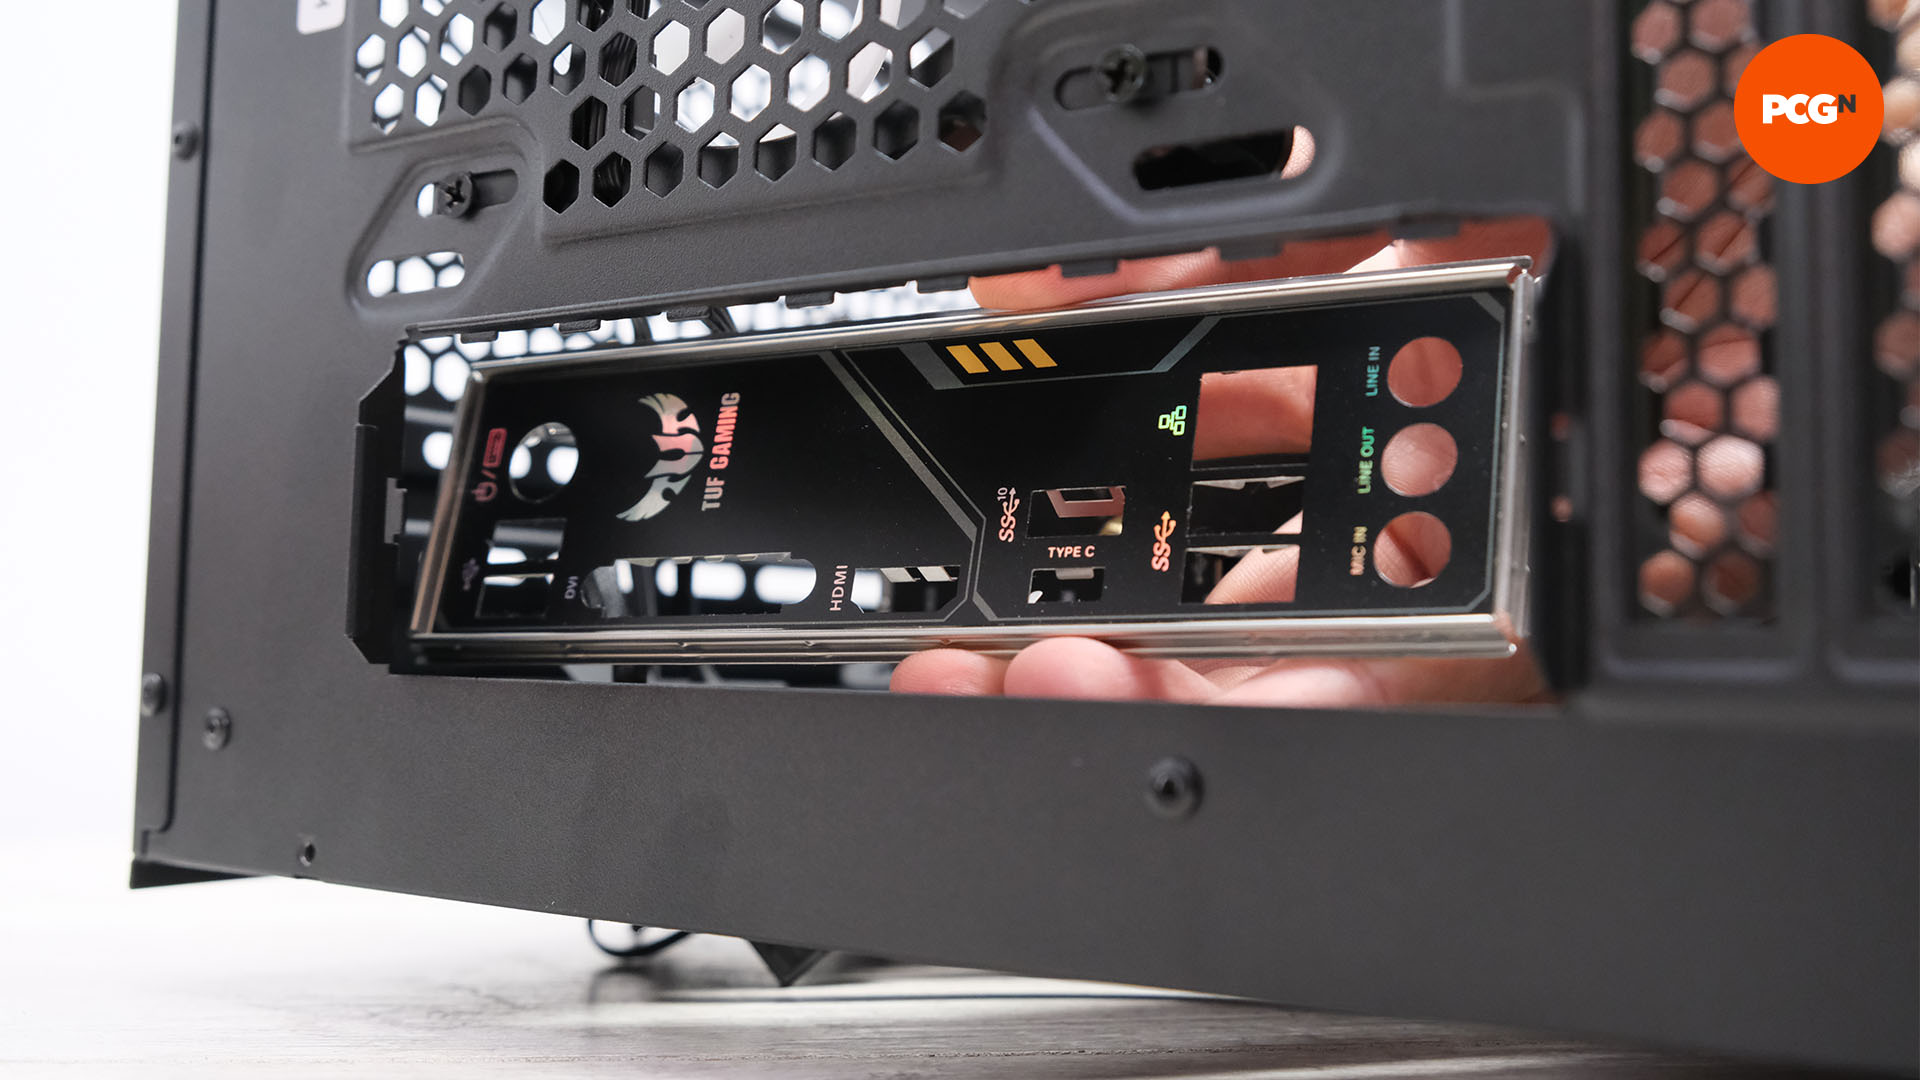 How to build a gaming PC: Fit motherboard I/O plate to case